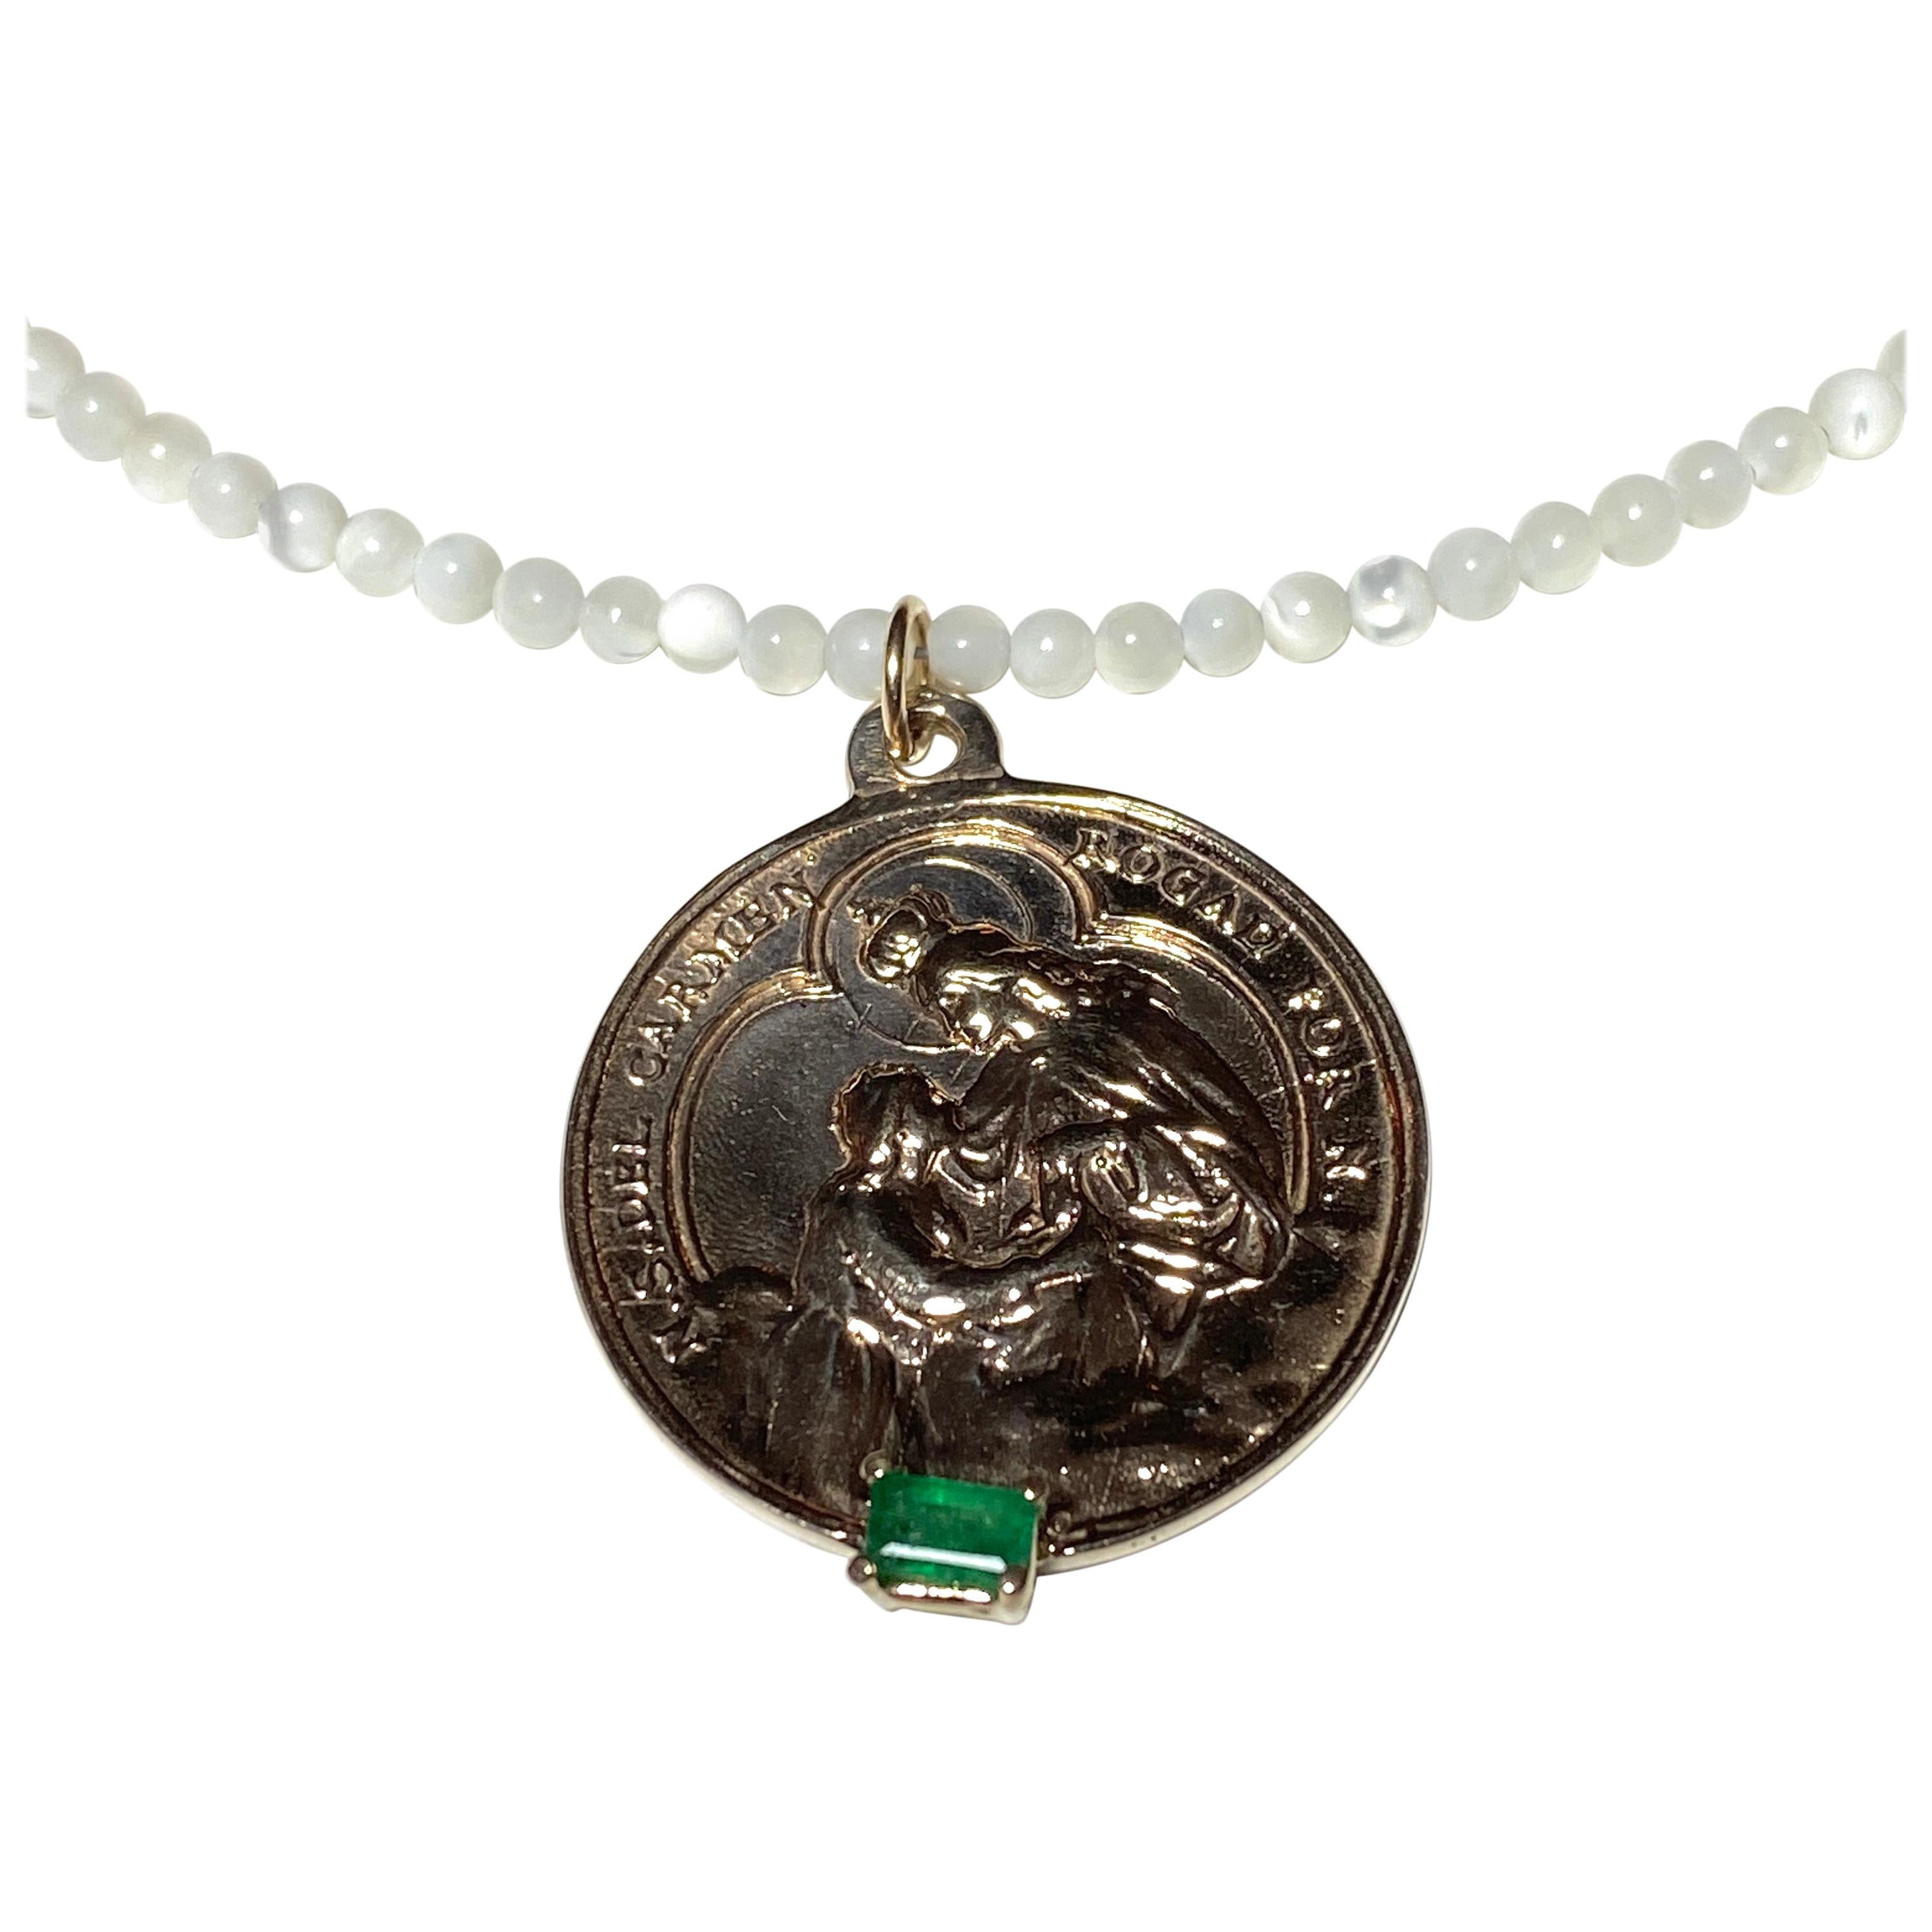 Emerald Carmen Bronze White Bead Necklace J Dauphin

Exclusive piece with Spanish Carmen pendant and an Emerald set in a gold prong on a bronze pendant. Bead Necklace is 16